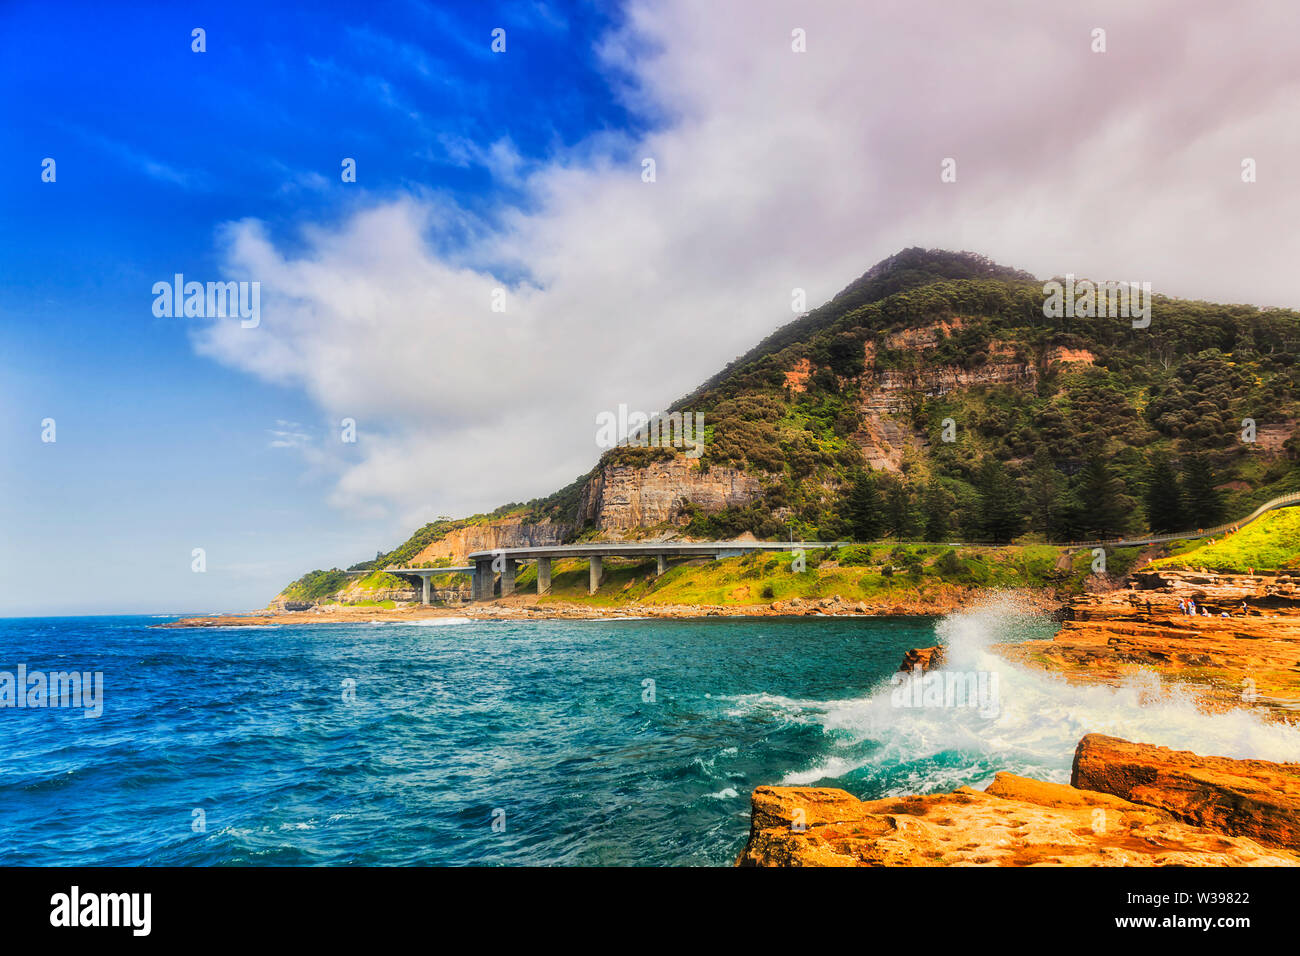 Sandstone rocks with surfing waves around Sea CLiff bridge of Grand Pacific drive in NSW, Australia, under blue sky. Stock Photo